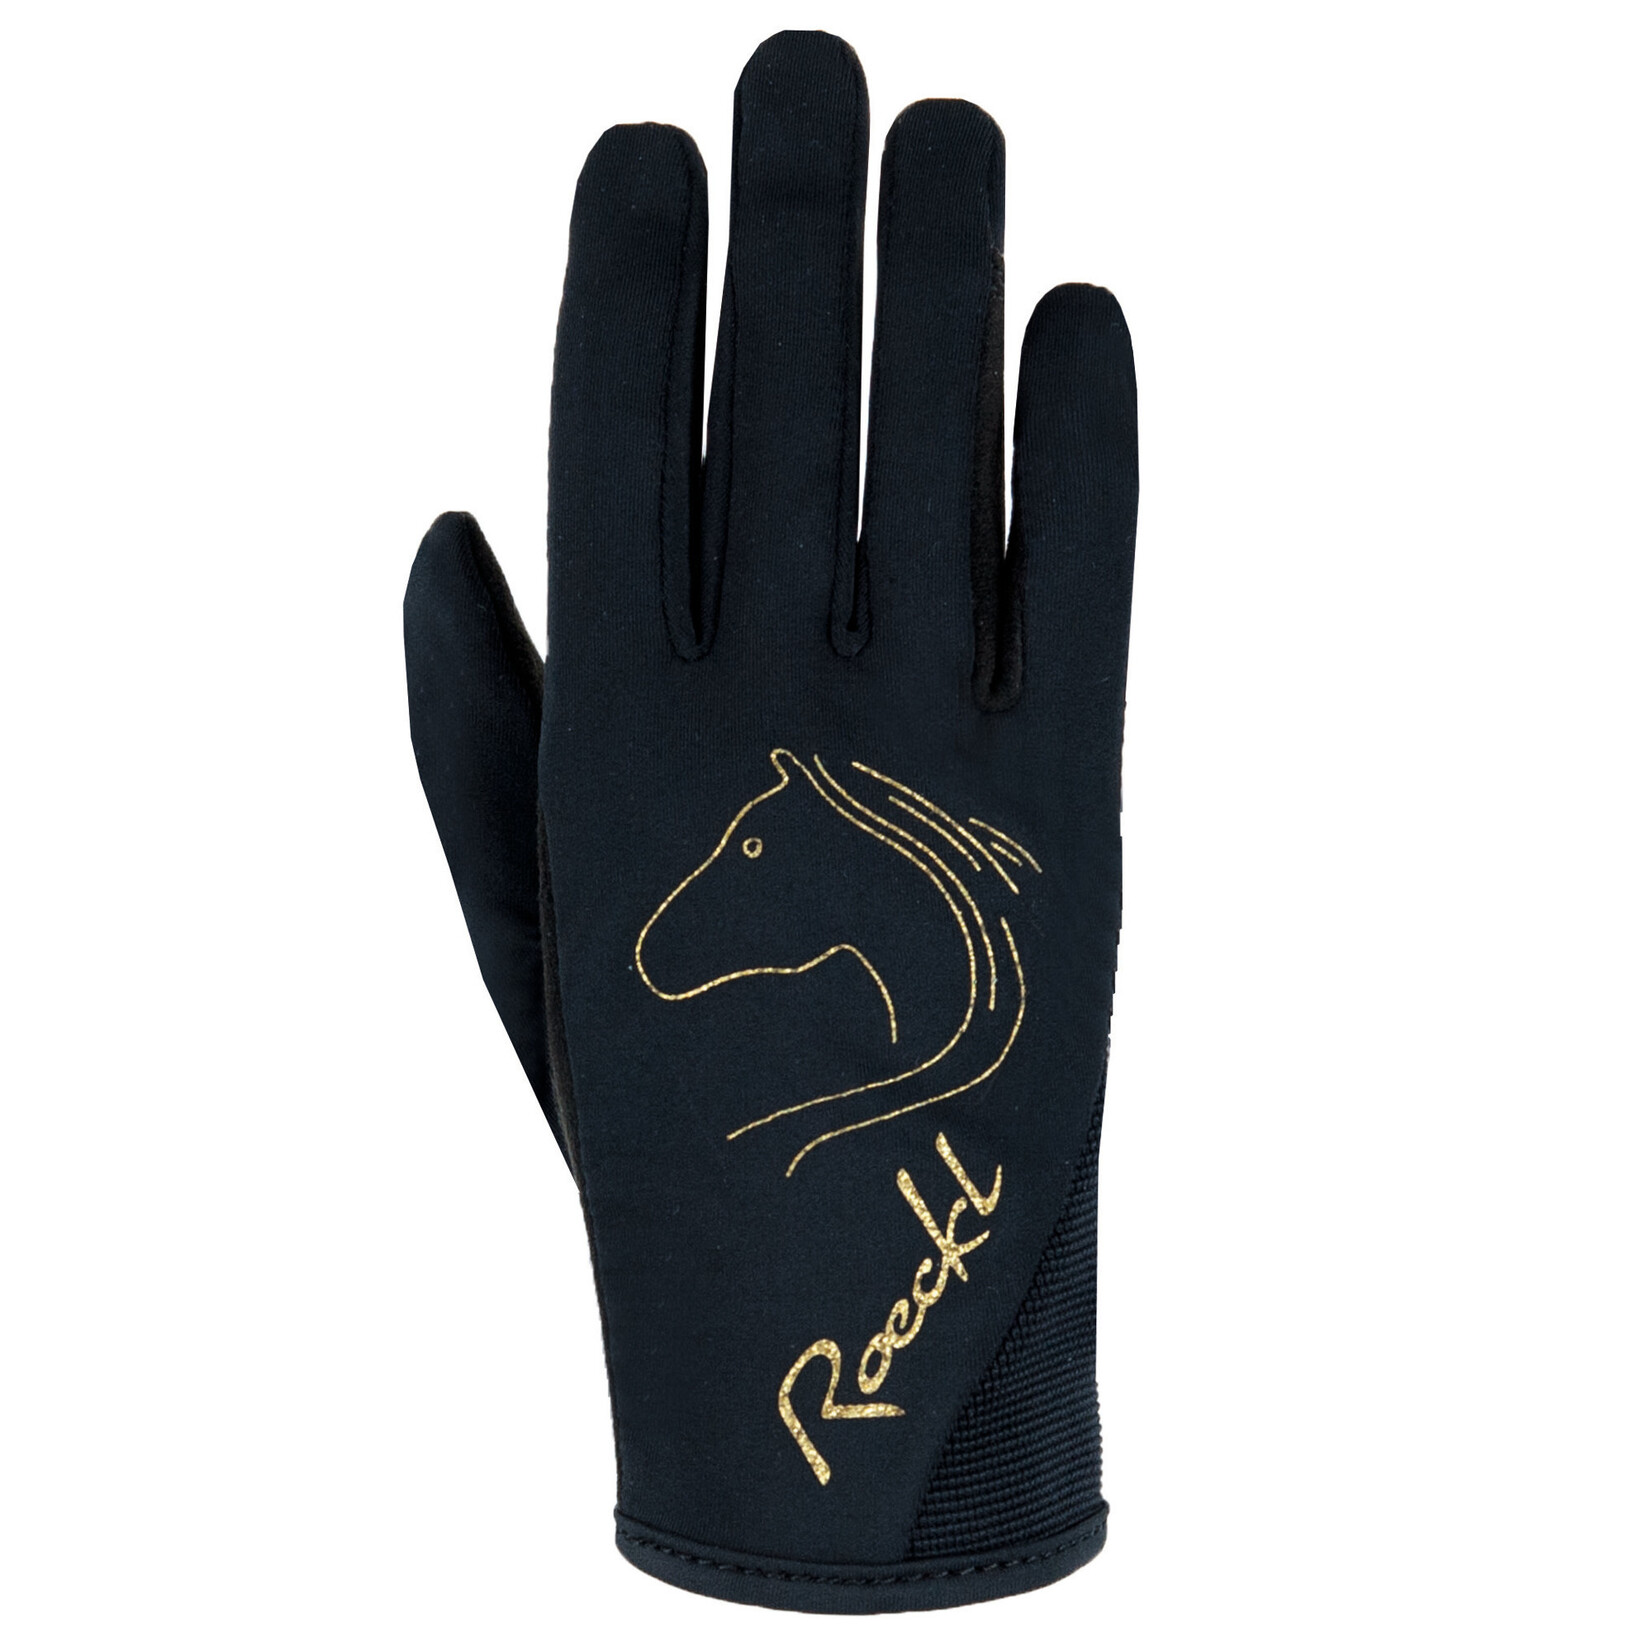 Roeckl Roeckl Children's Tryon Riding Gloves